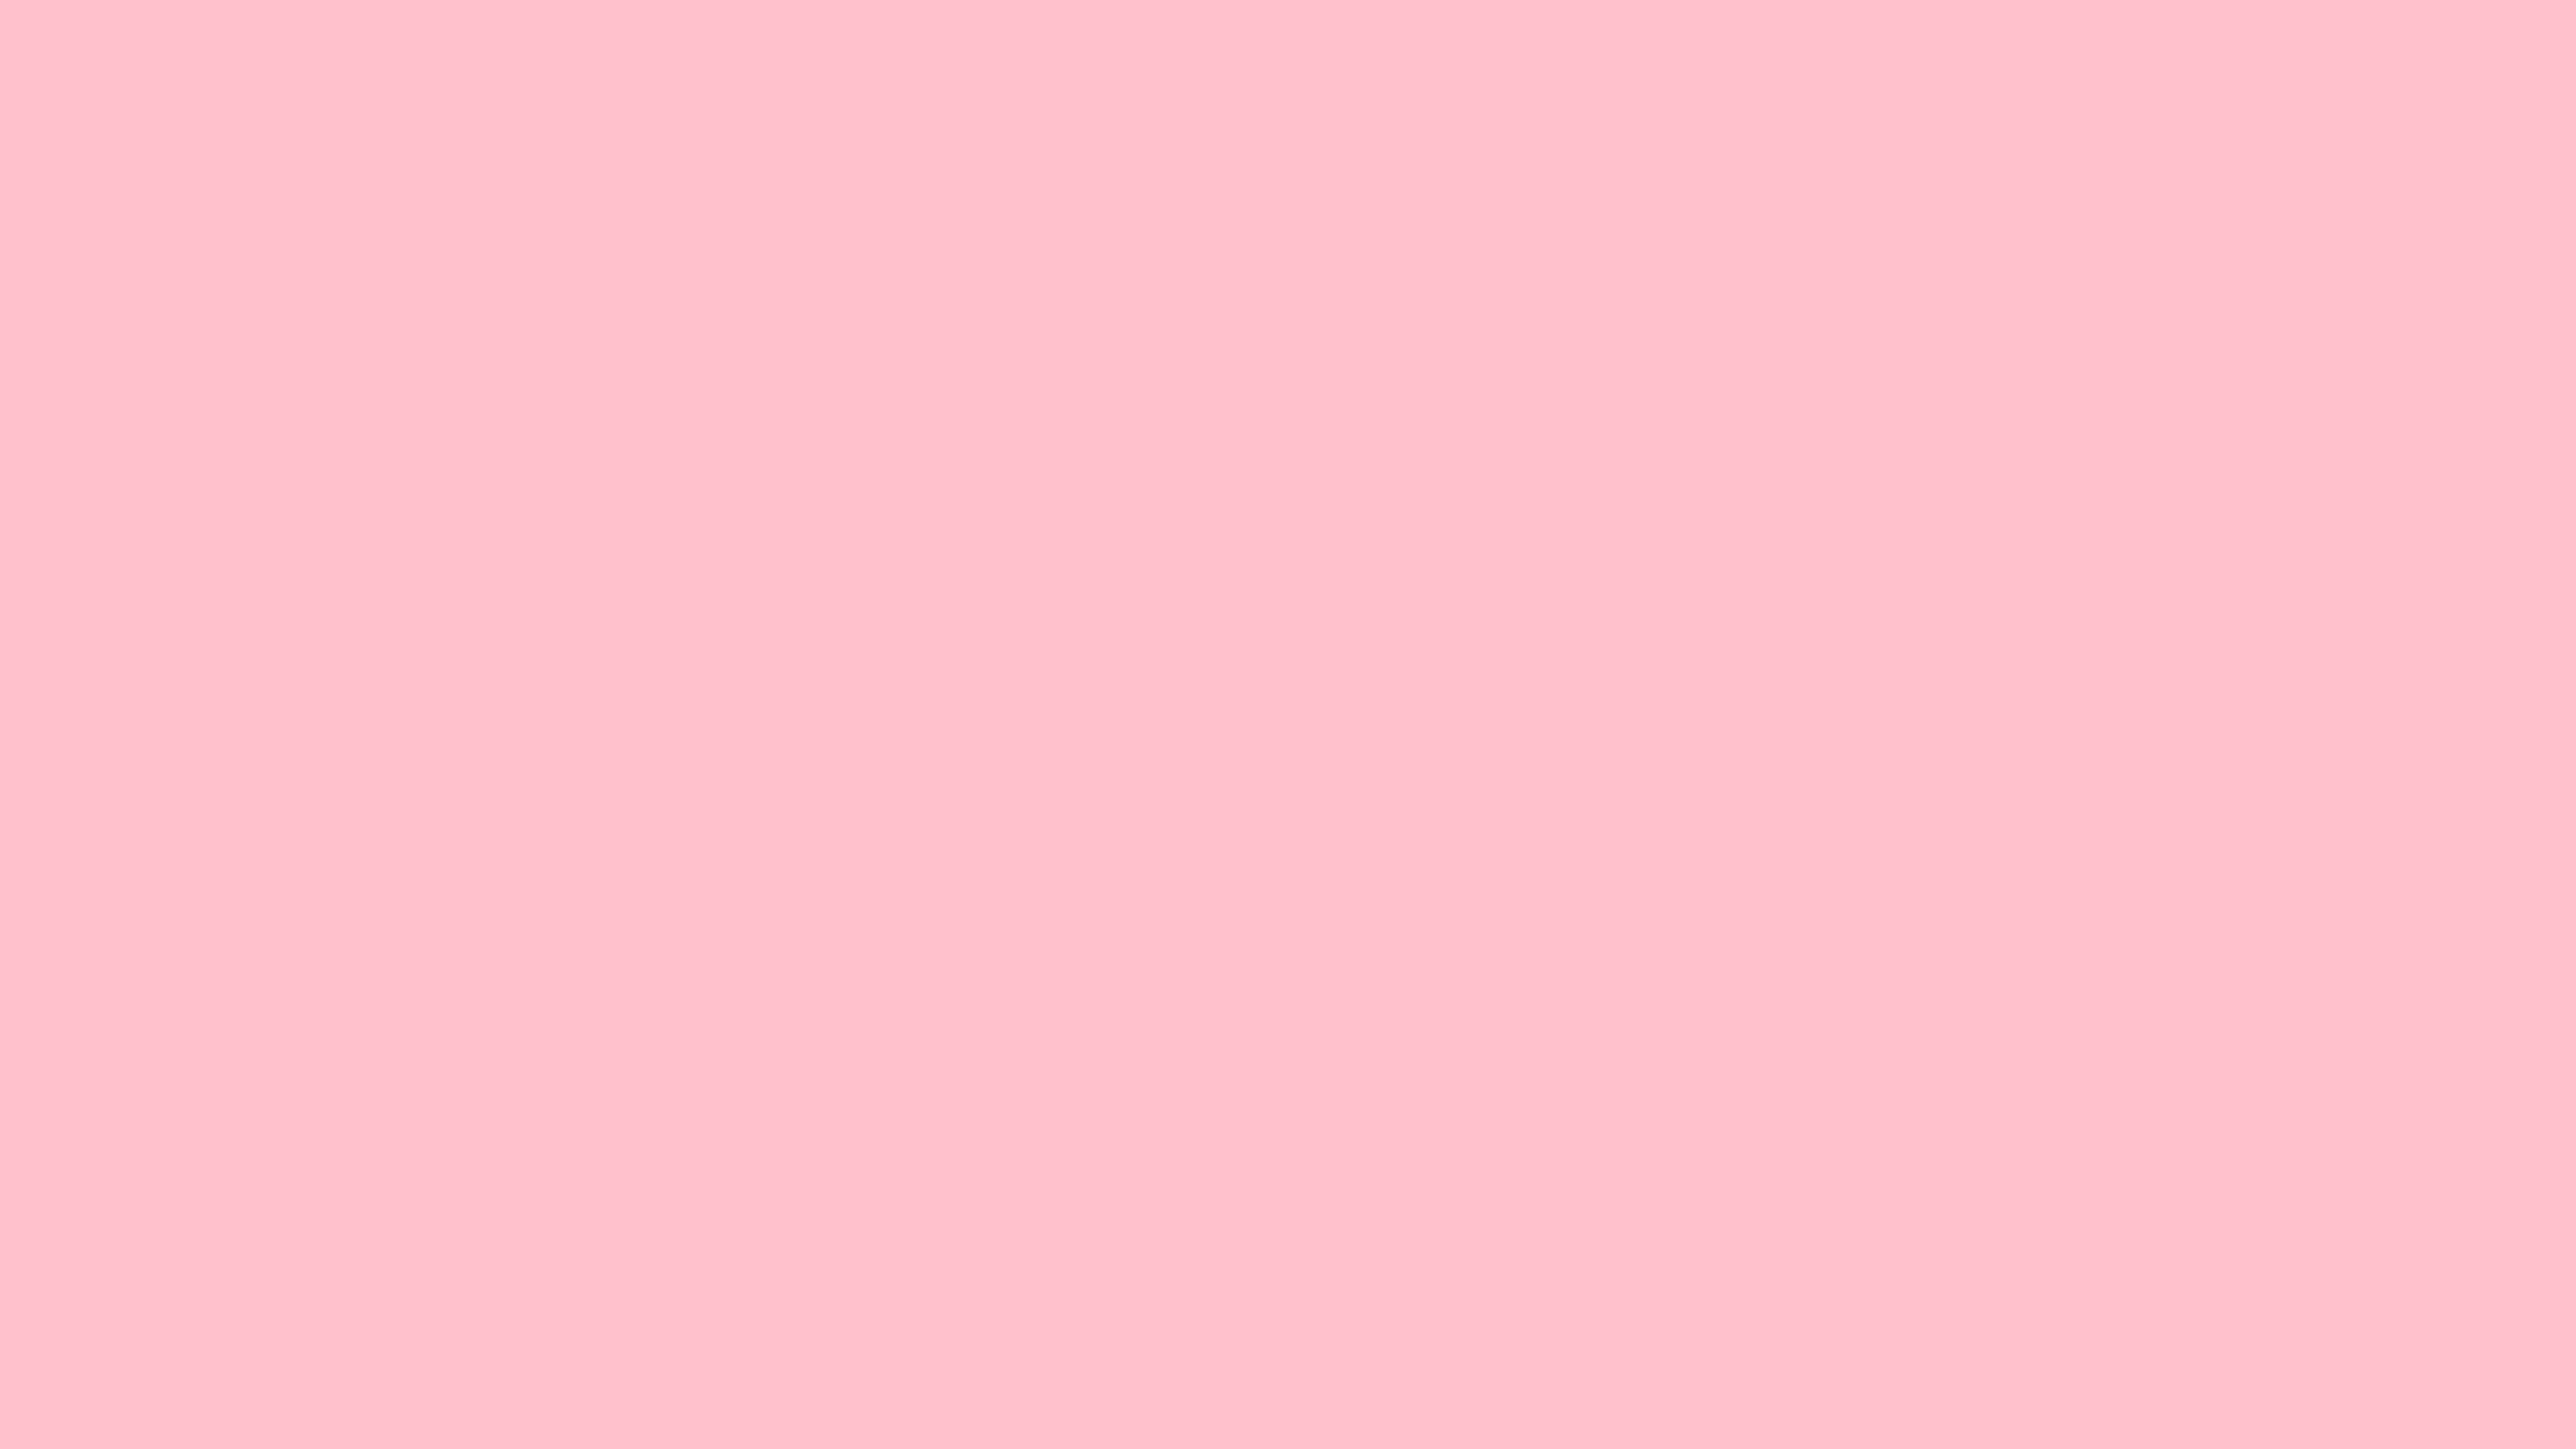 8. "Bubblegum Pink" - a fun, playful pink shade that will be a hit in 2024 - wide 10